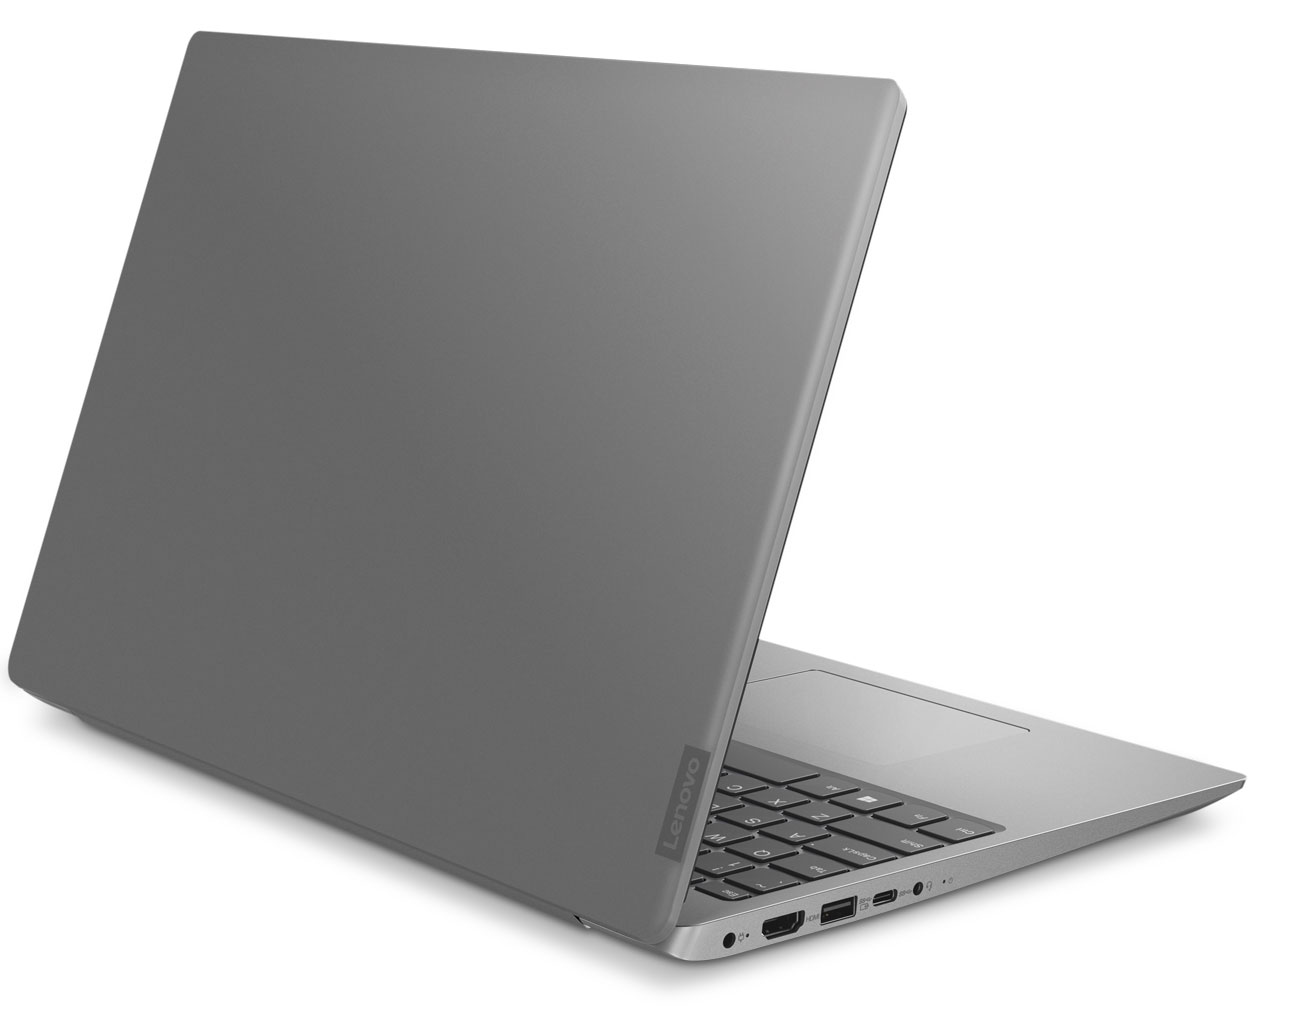 Lenovo IdeaPad 330S (15″) - Specs, Tests, and Prices